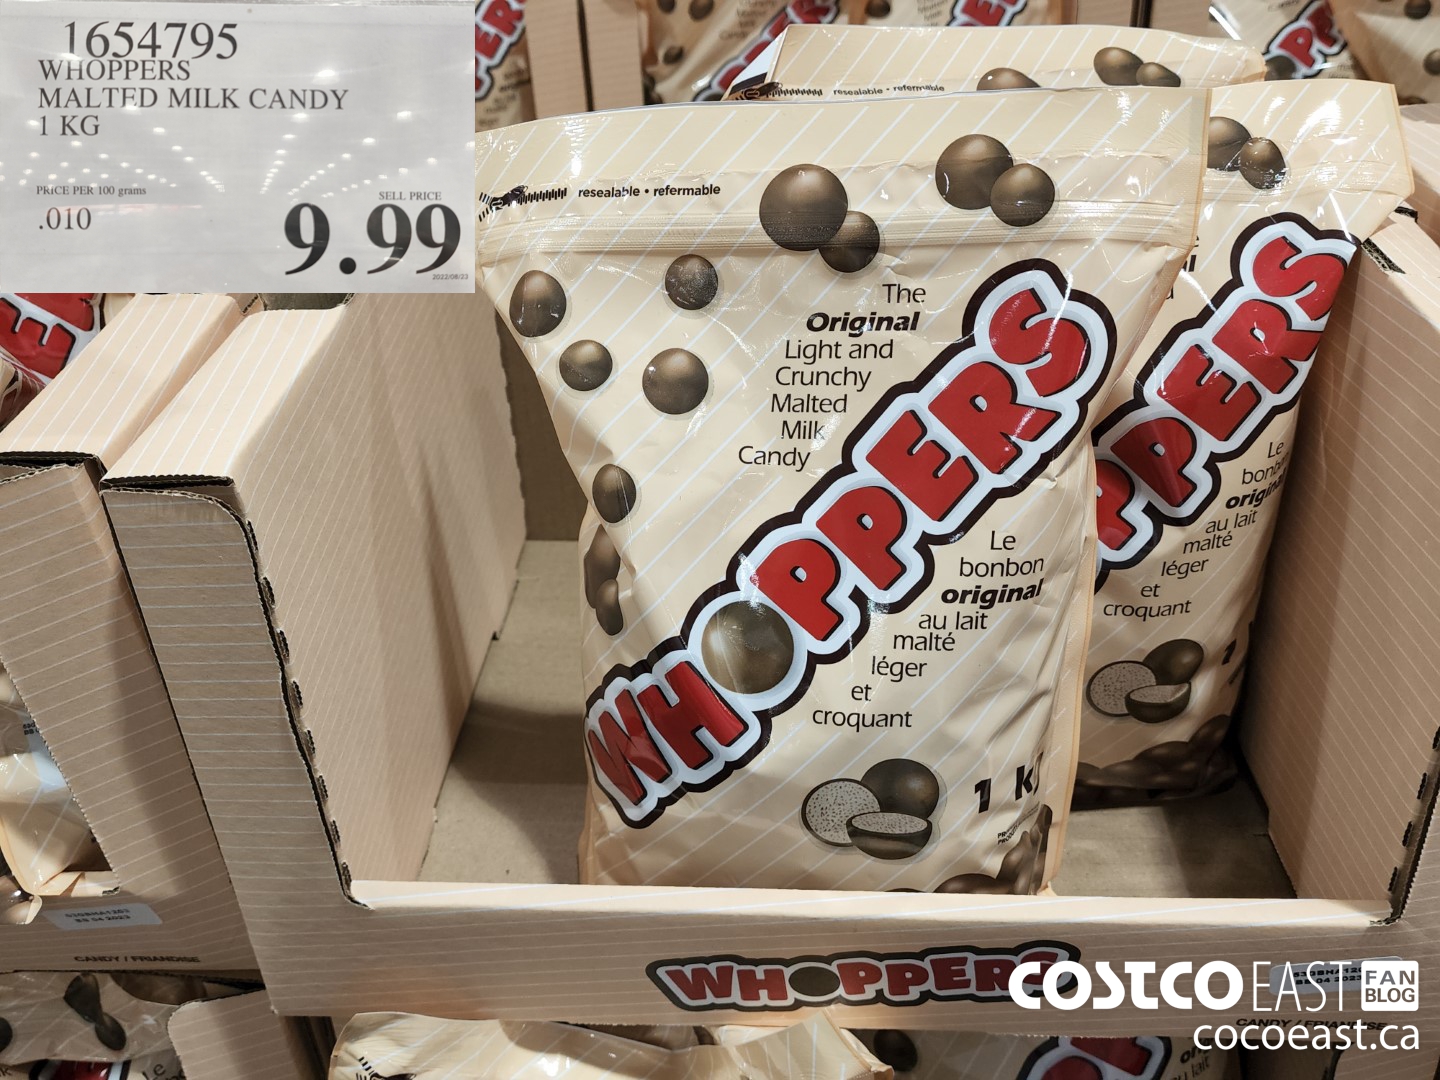 1654795 WHOPPERS MALTED MILK CANDY 1 KG 9 99 - Costco East Fan Blog